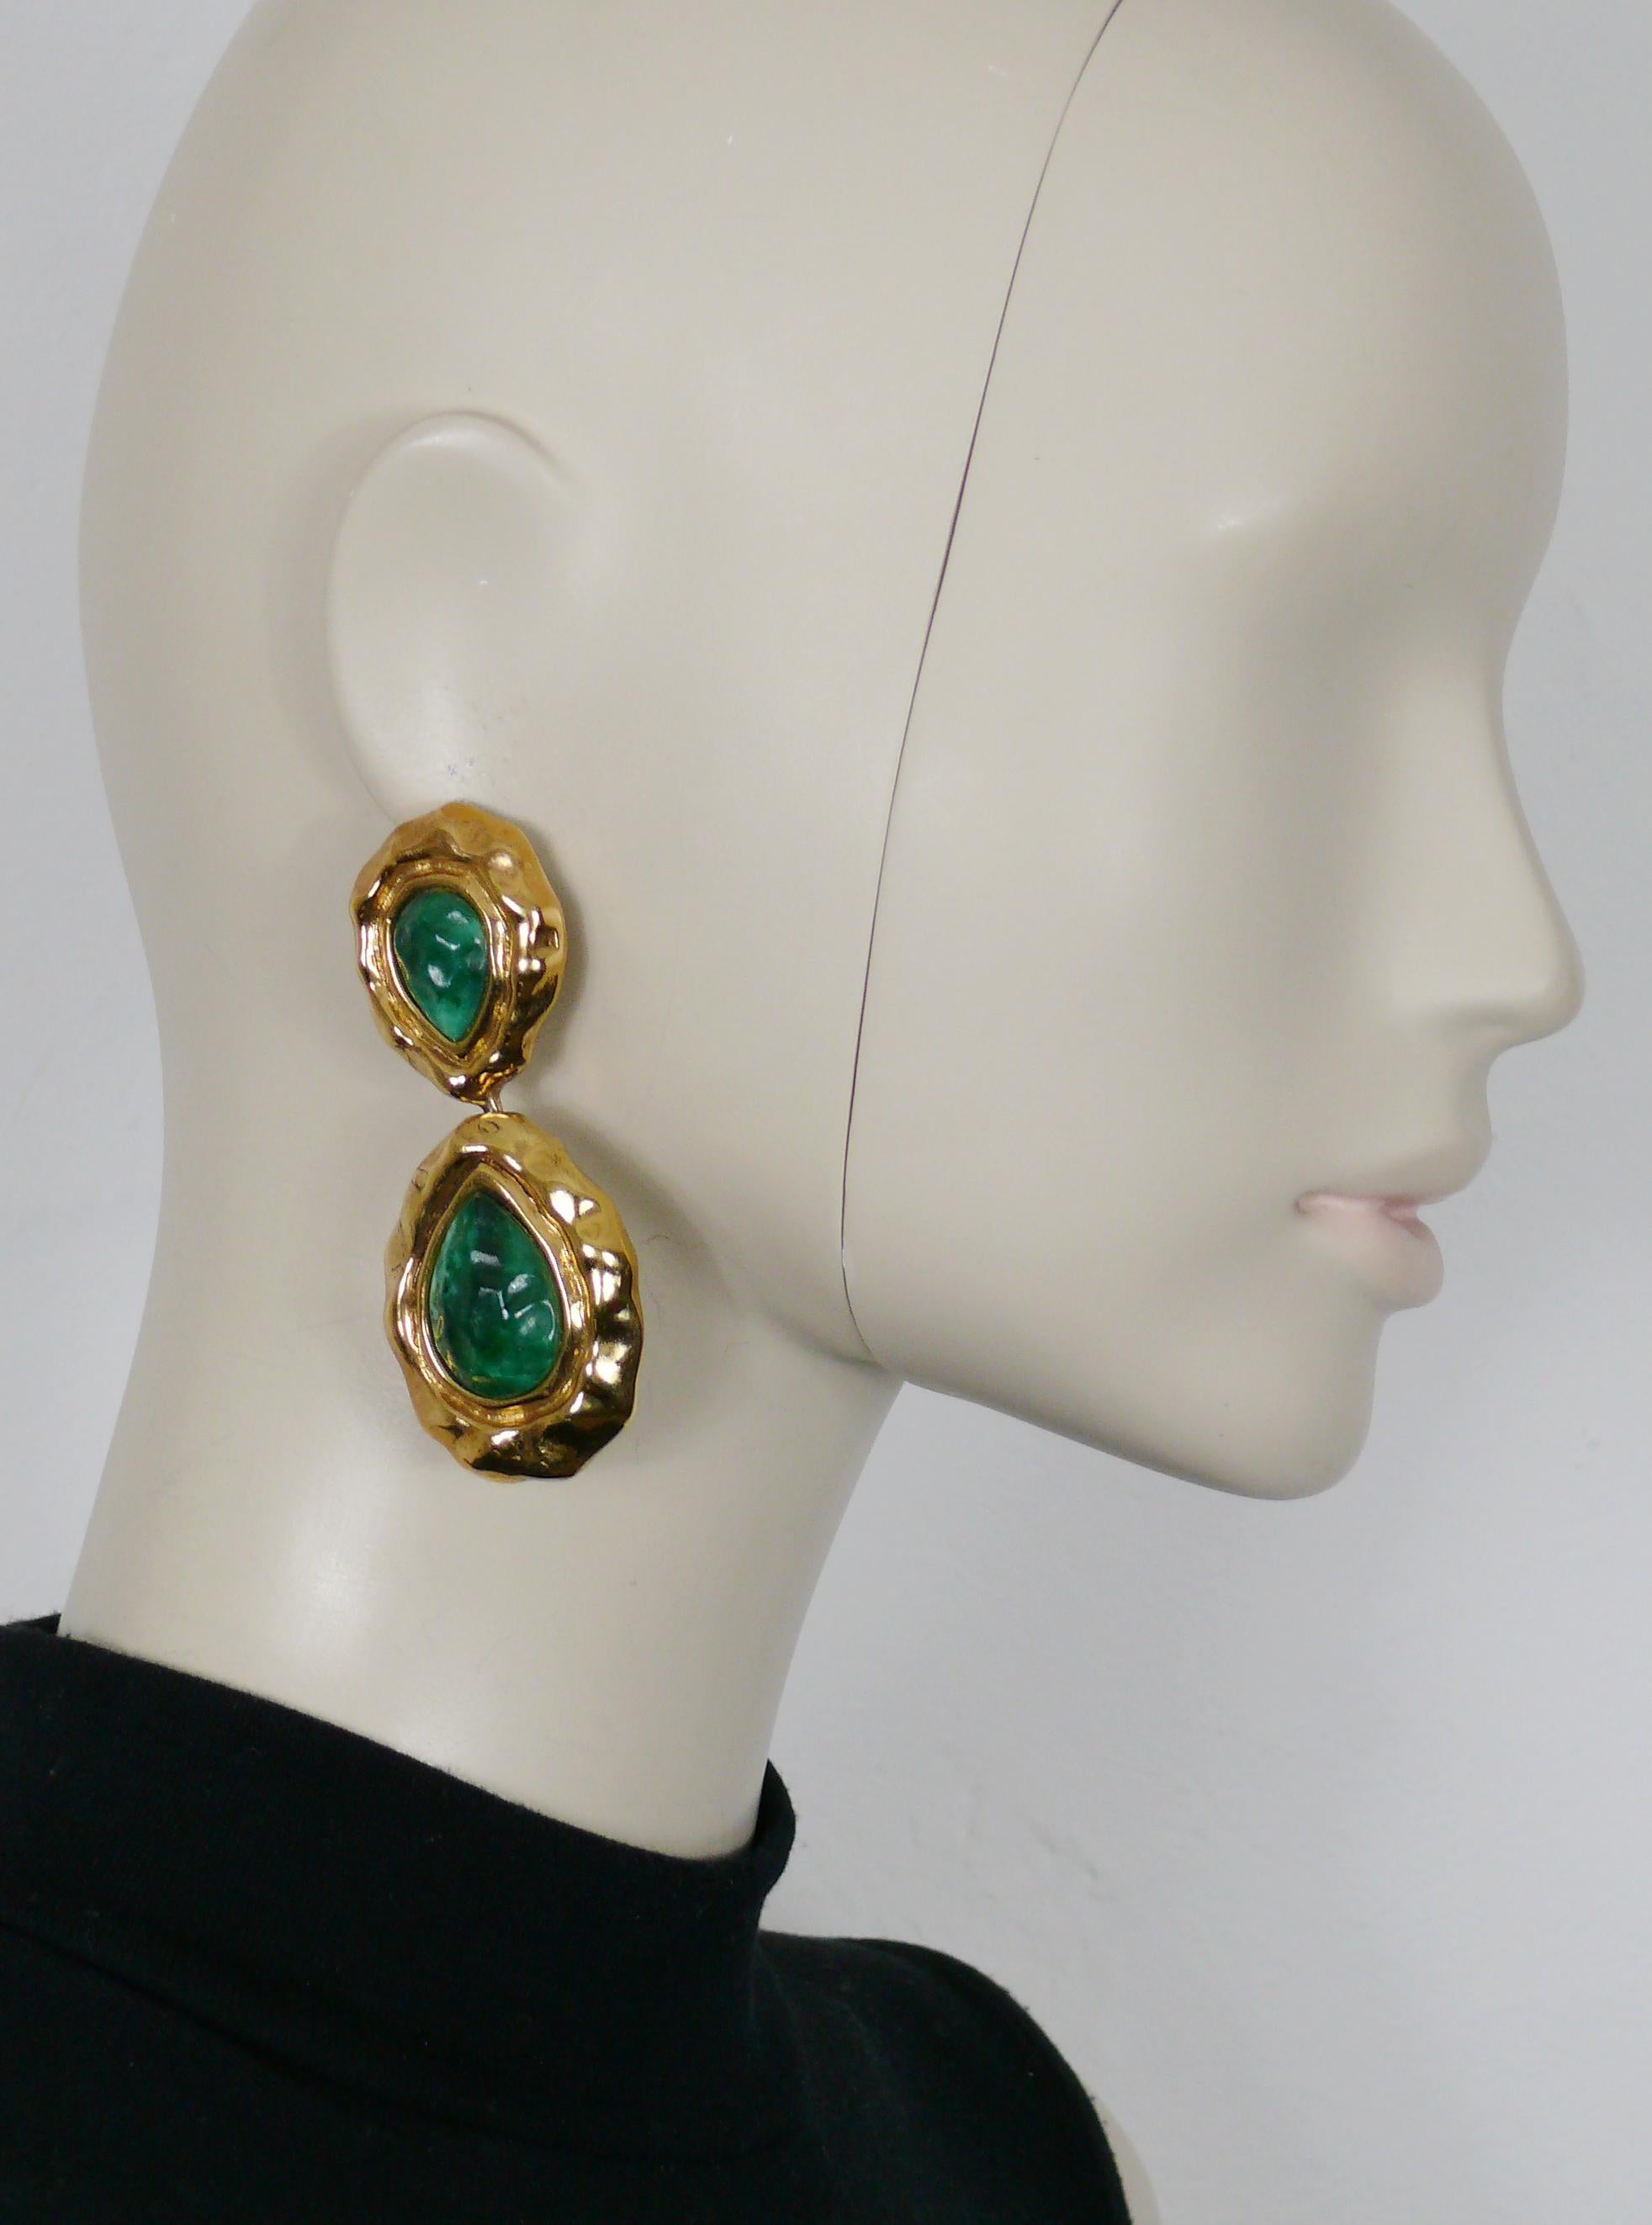 GUY LAROCHE vintage gold tone dangling earrings (clip-on) featuring two marbled green glass cabochons.

Embossed GL.

Indicative measurements : height approx. 8.2 cm (3.23 inches) / max width approx. 3.4 cm (1.34 inches).

Weight per earring :